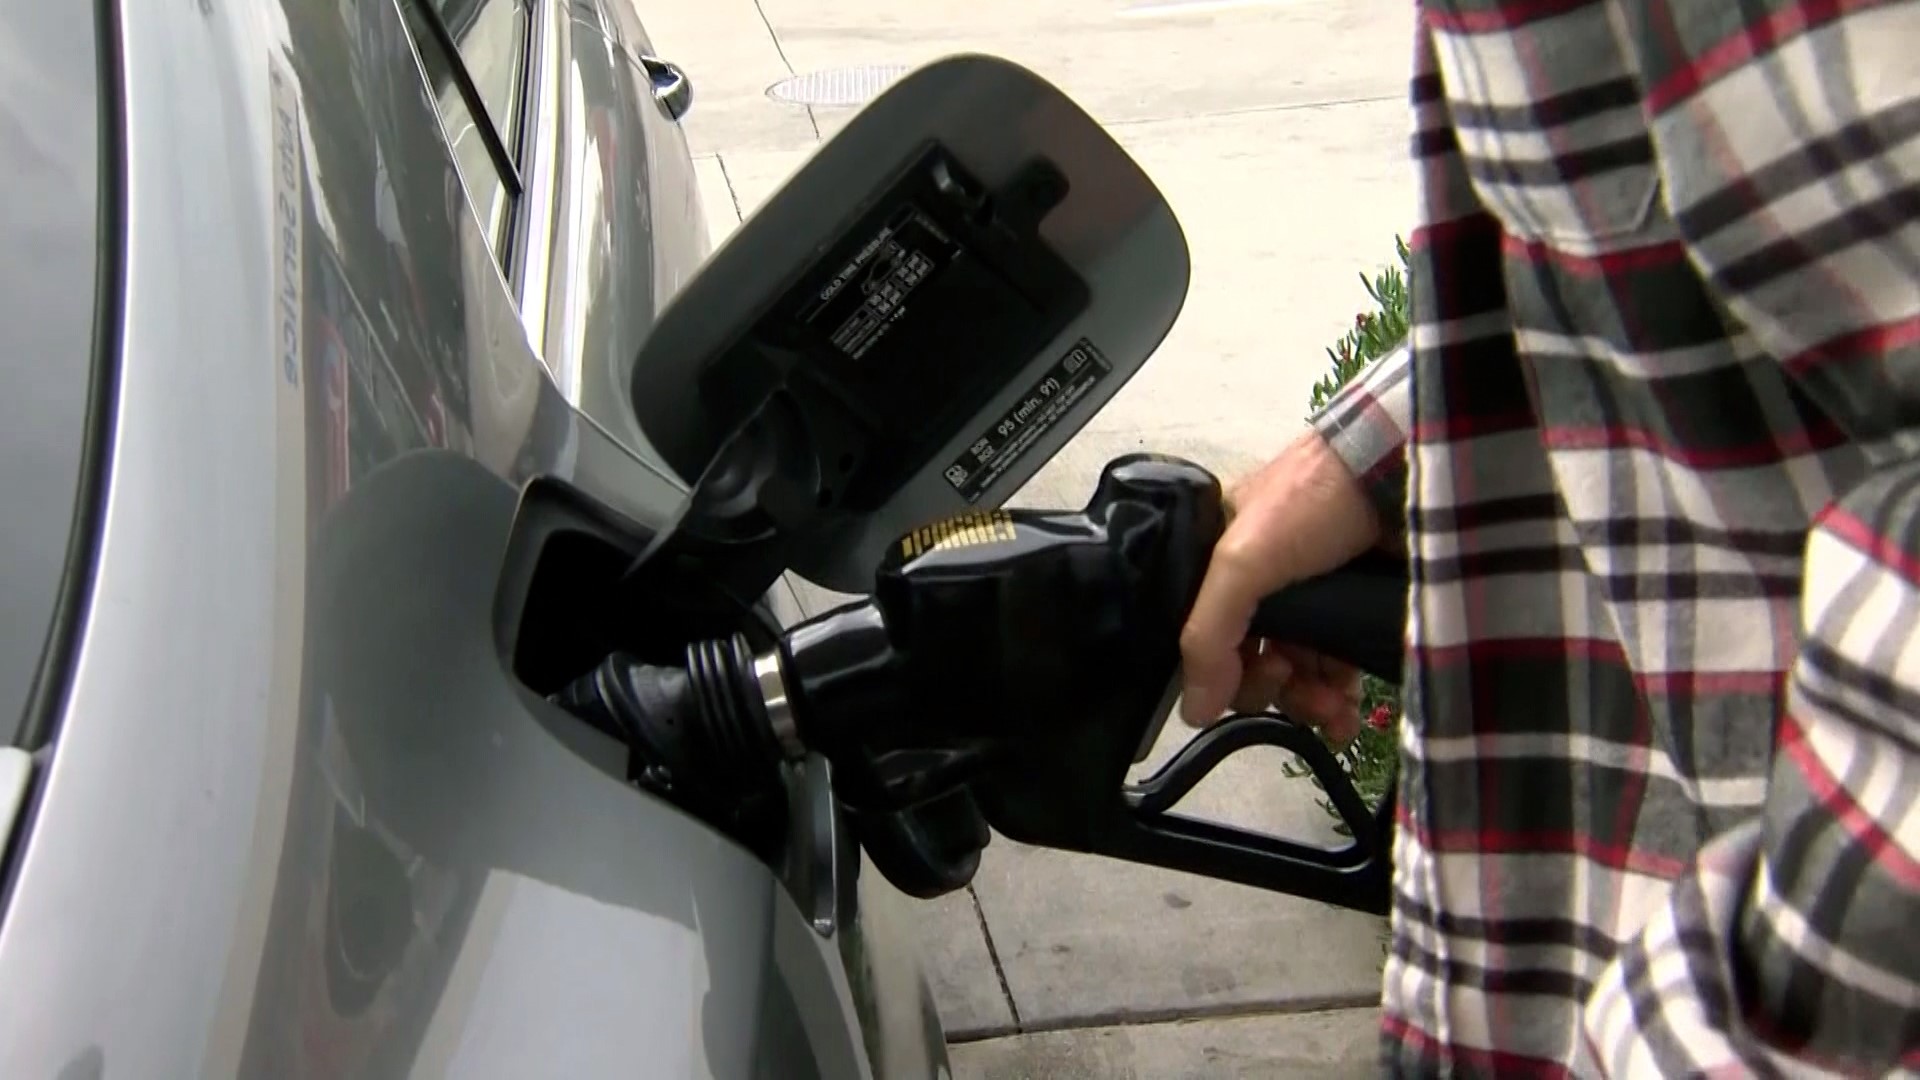 According to AAA, Northwest Arkansas has the highest gas prices in the state with drivers across the area paying $3.28 per gallon for fuel.